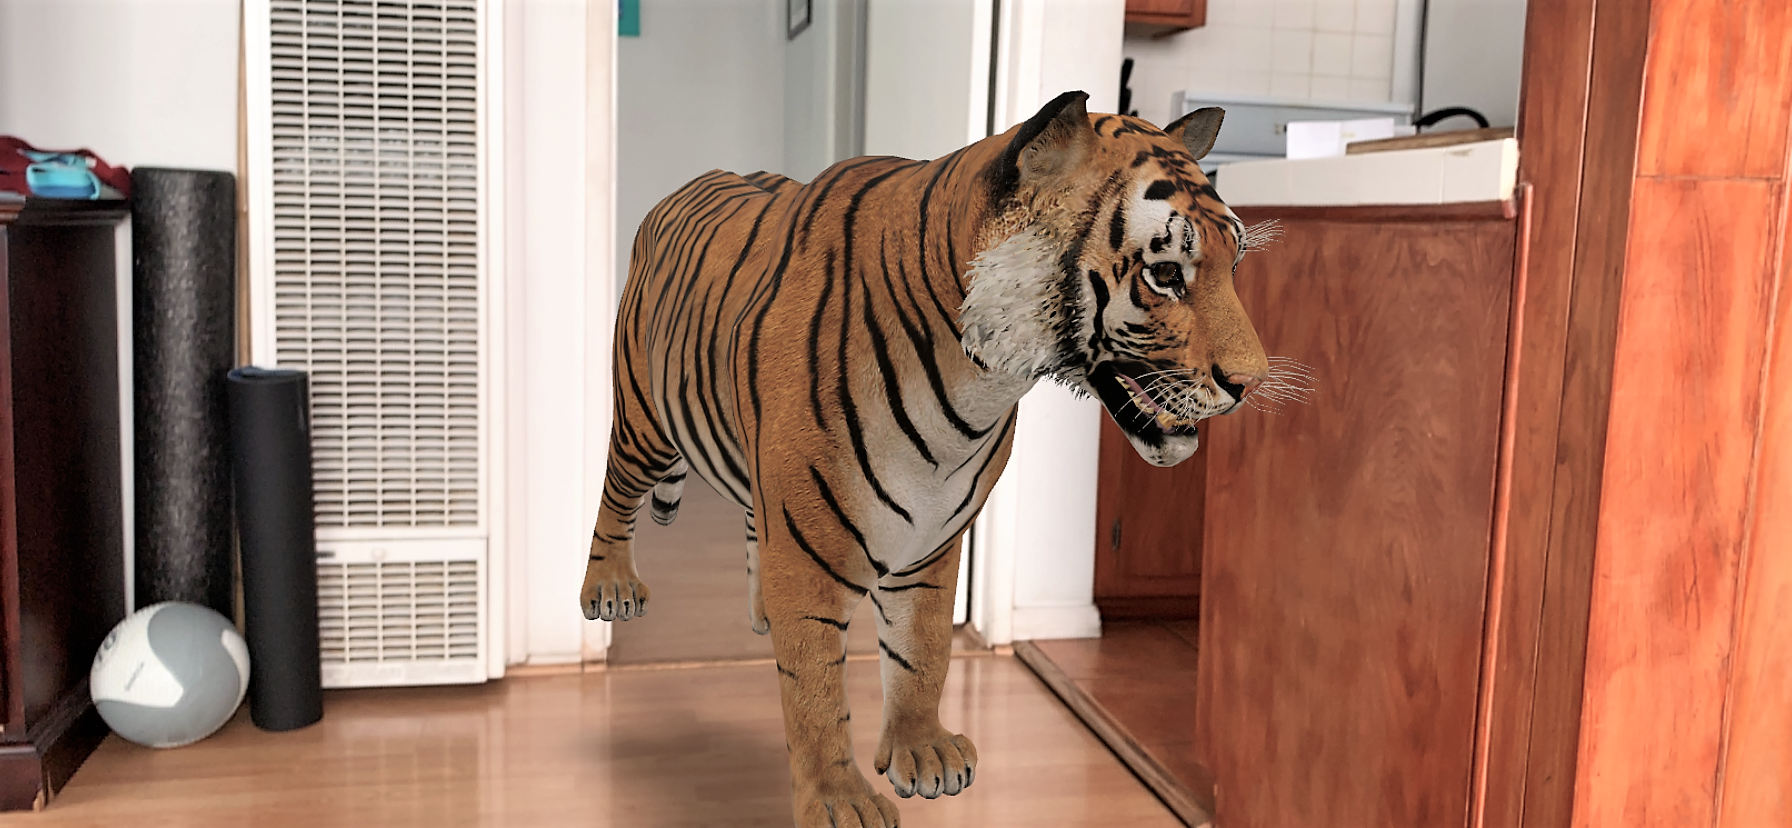 See how to bring 3D animals into your home with Google, through augmented  reality